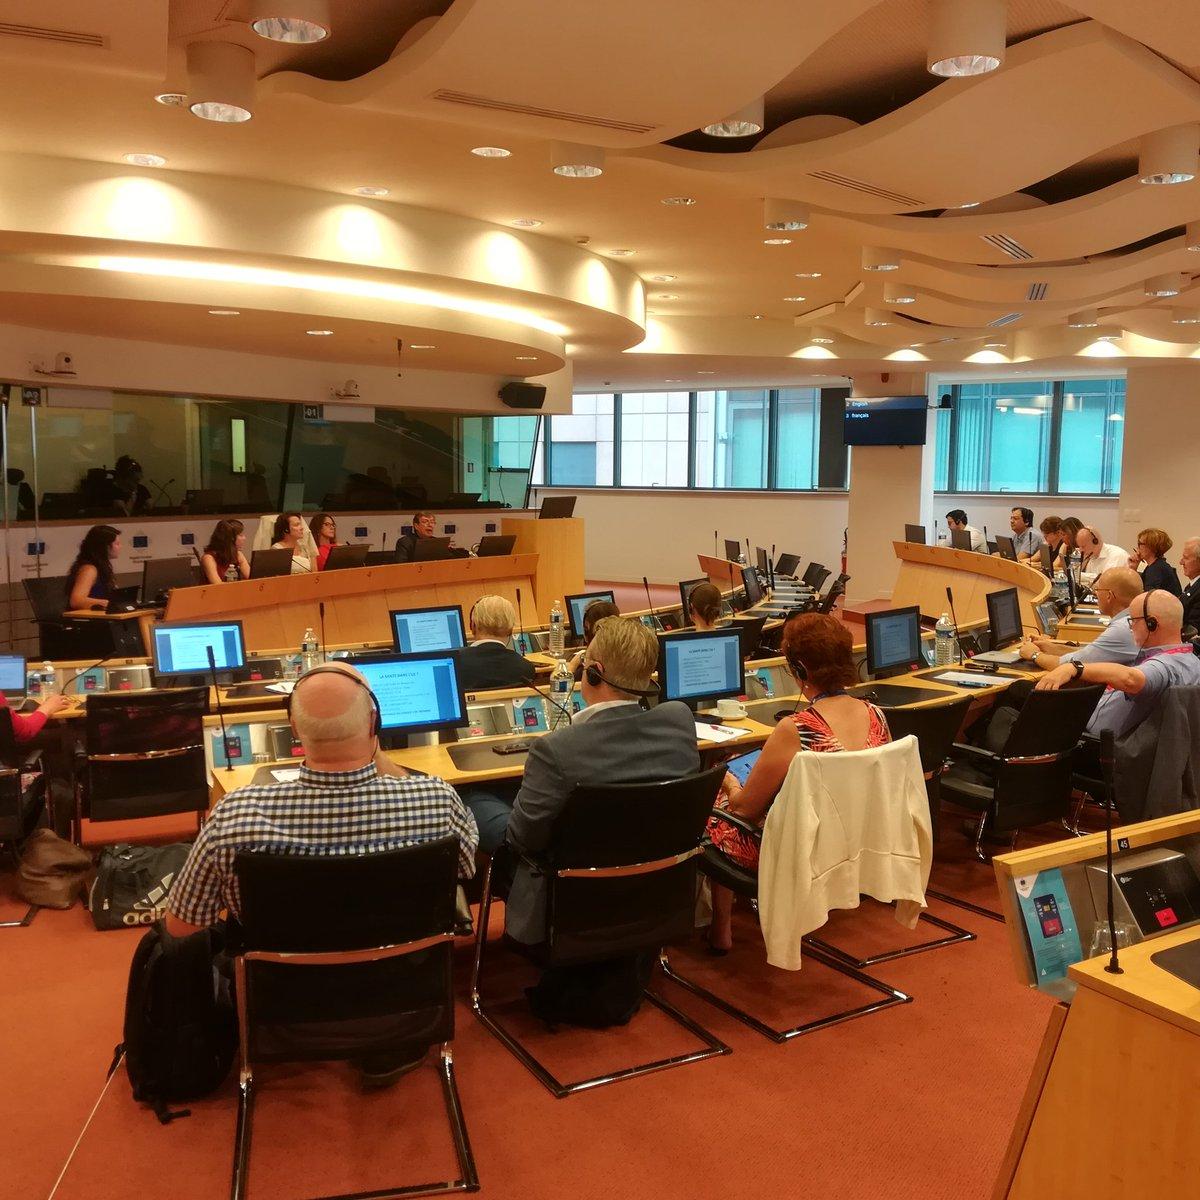 Global Challenges, Territorial Answers: the Future of Health in Europe - Event organised by EUREGHA on behalf of the Committee of the Region's Interregional Group on Health and Well-being